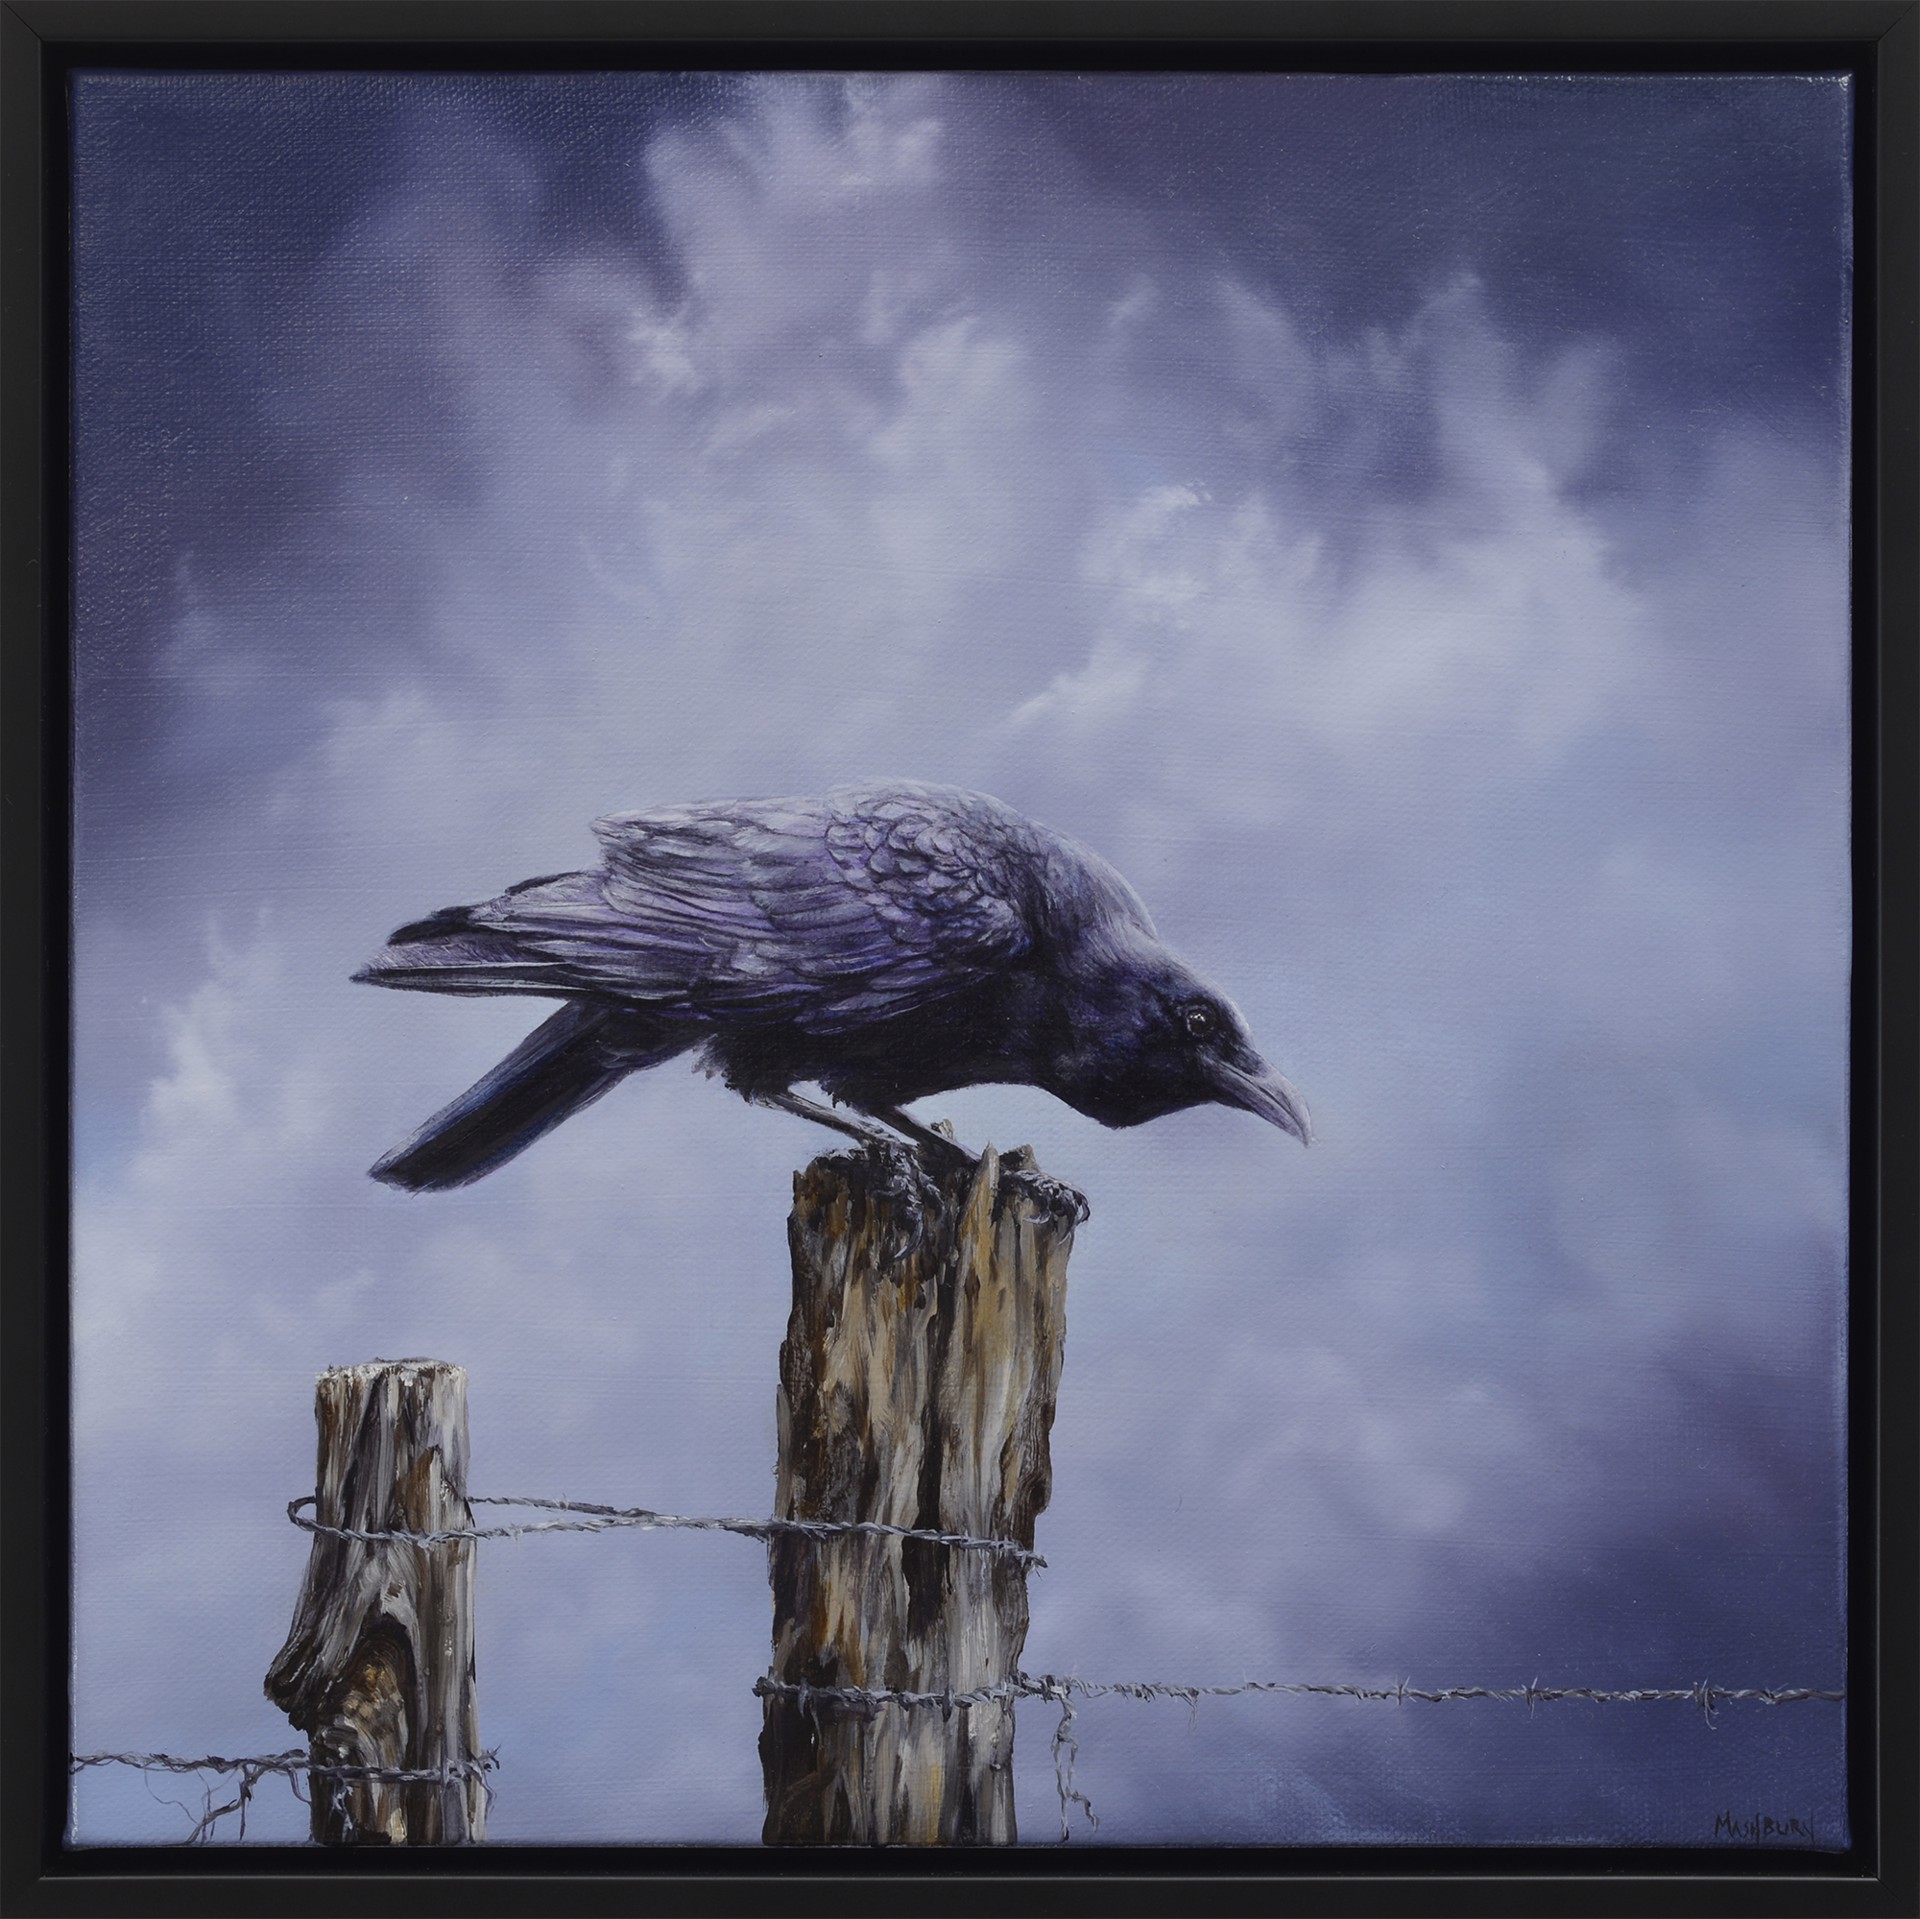 Crow Perched on a Fence Post by Brian Mashburn